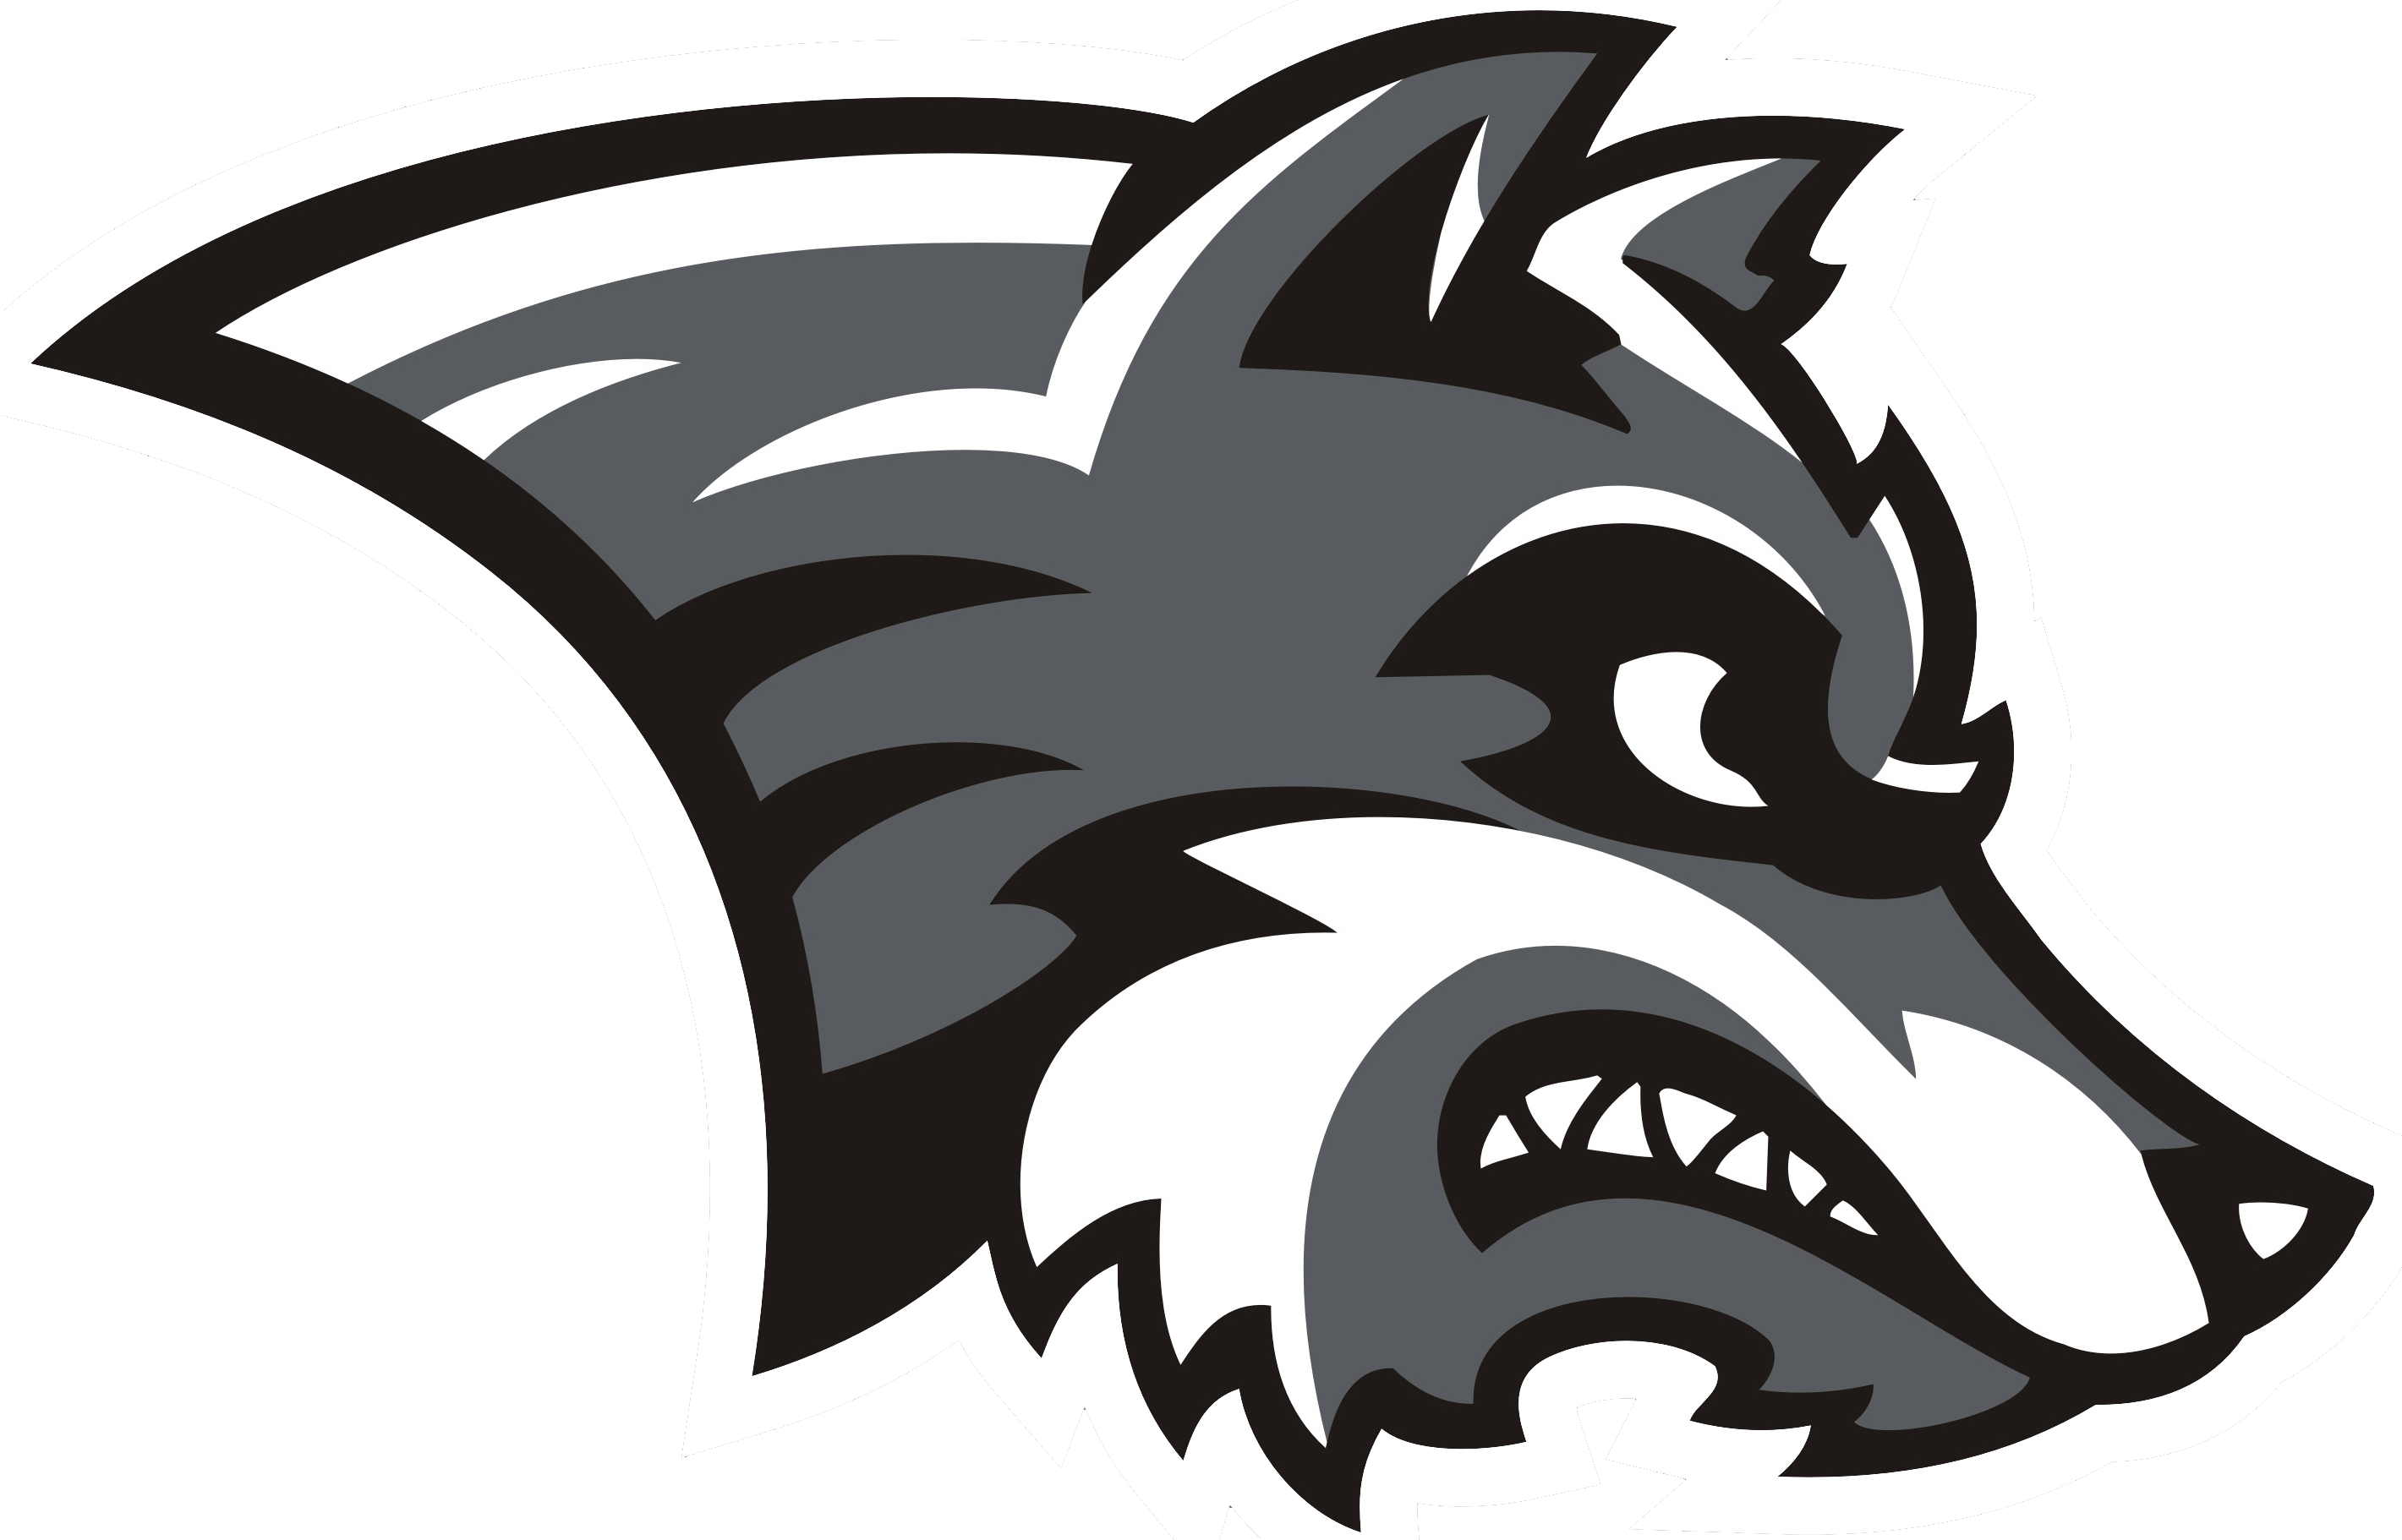 Wolf head logo graphics. Wolves clipart eps